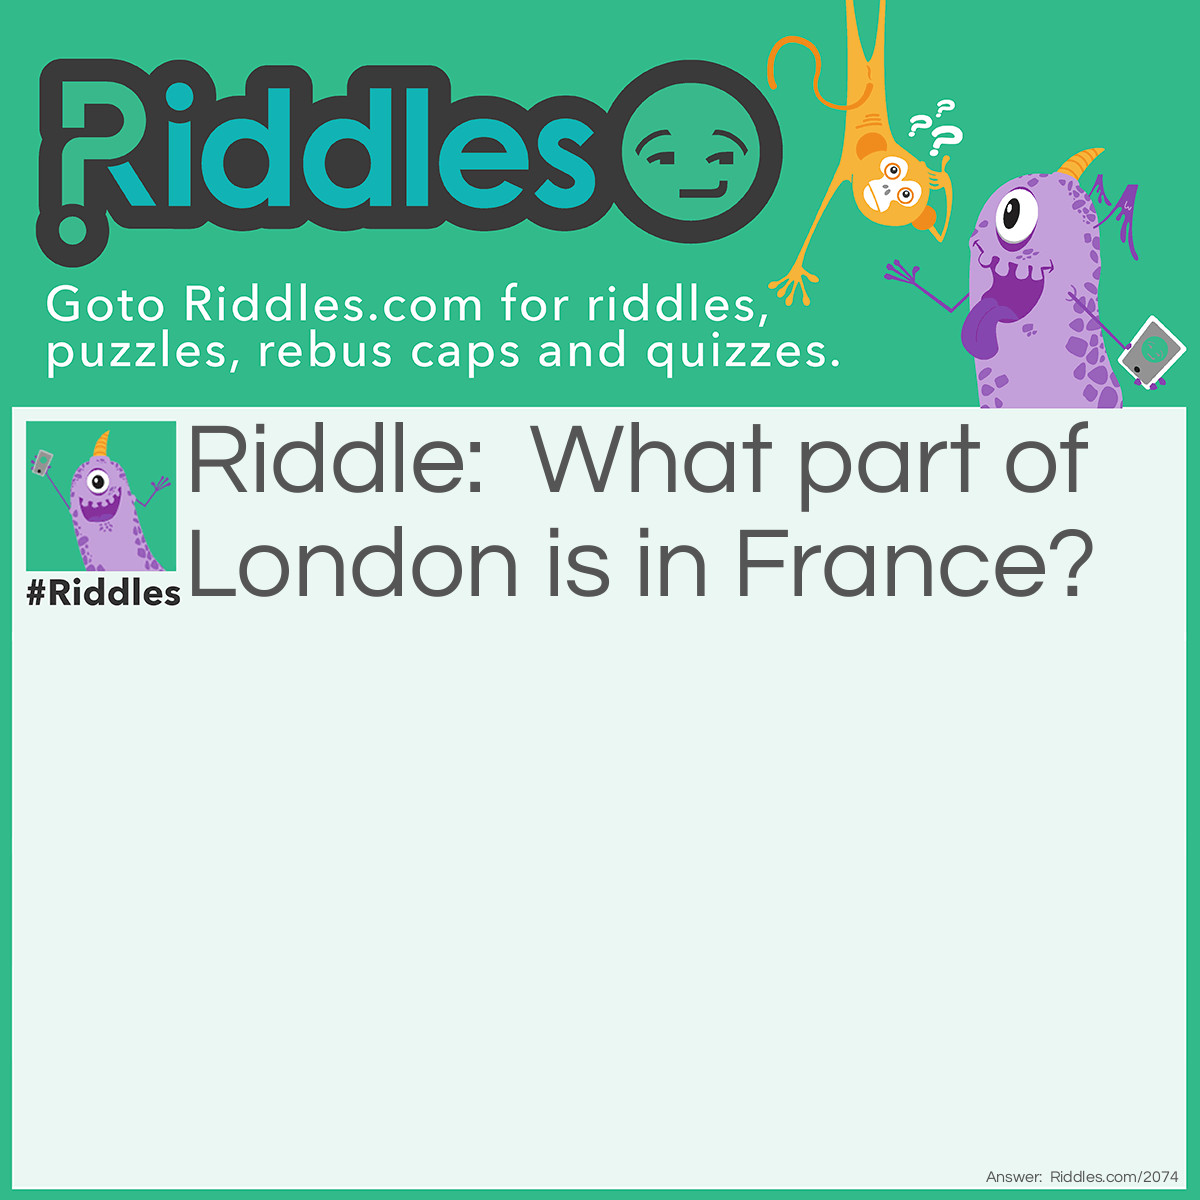 Riddle: What part of London is in France? Answer: The letter N.